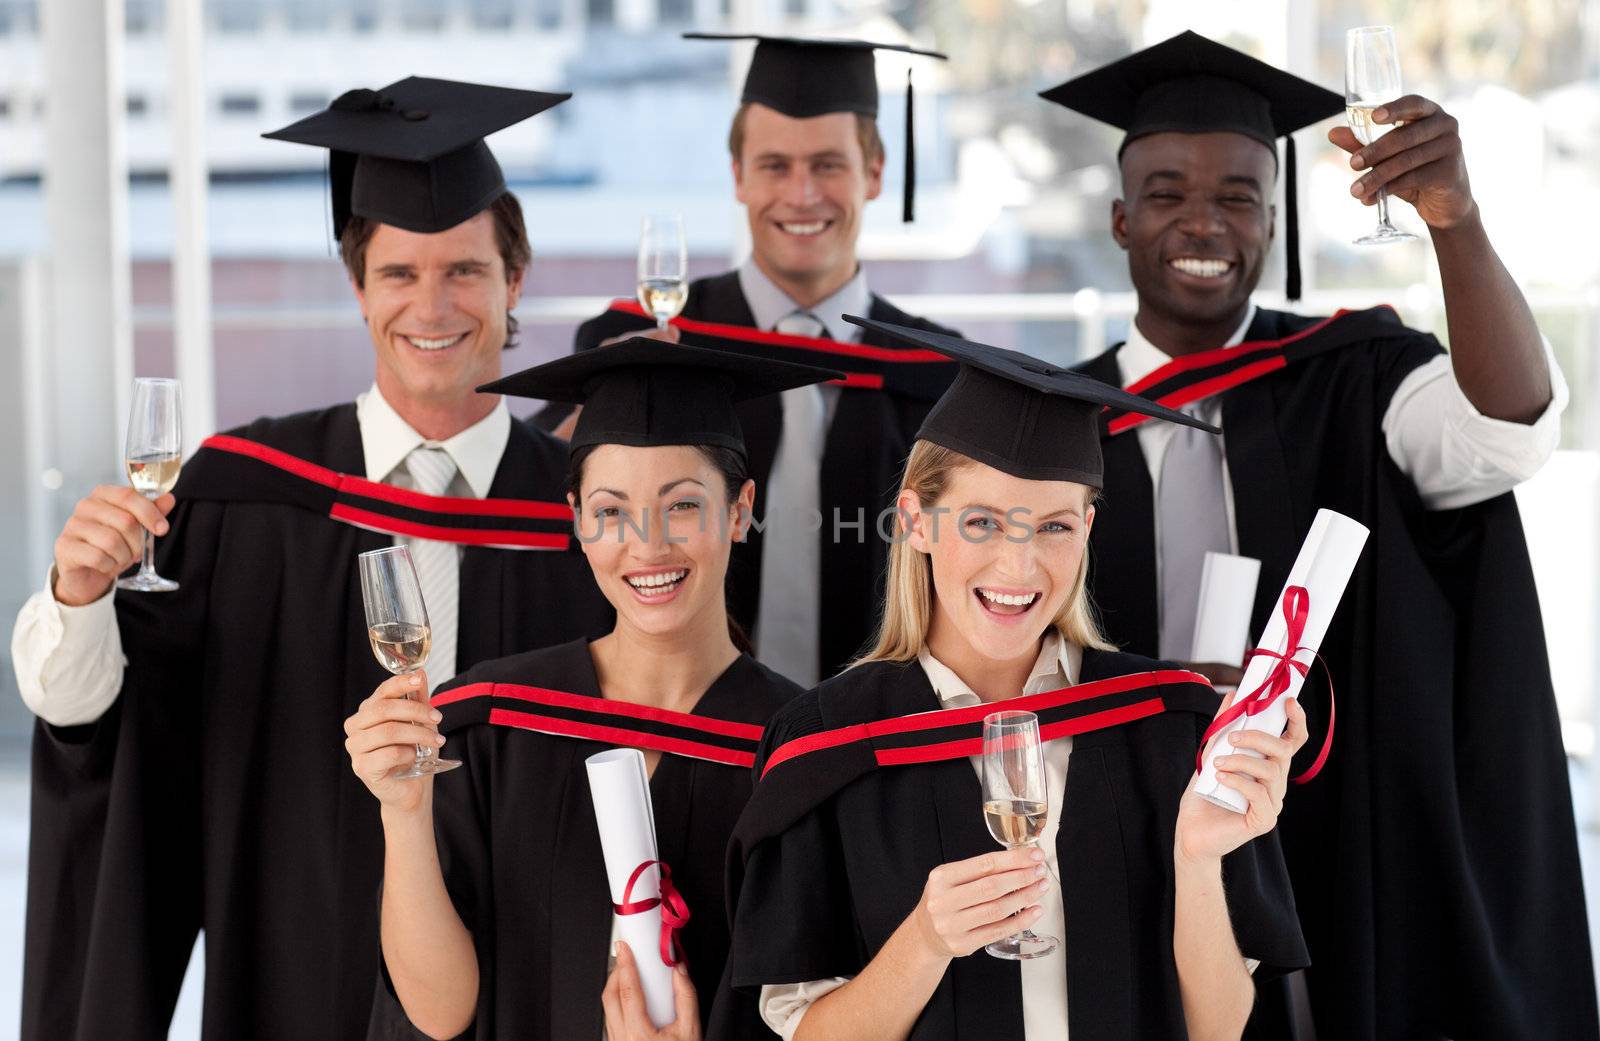 Group of people Graduating from College from different cultures